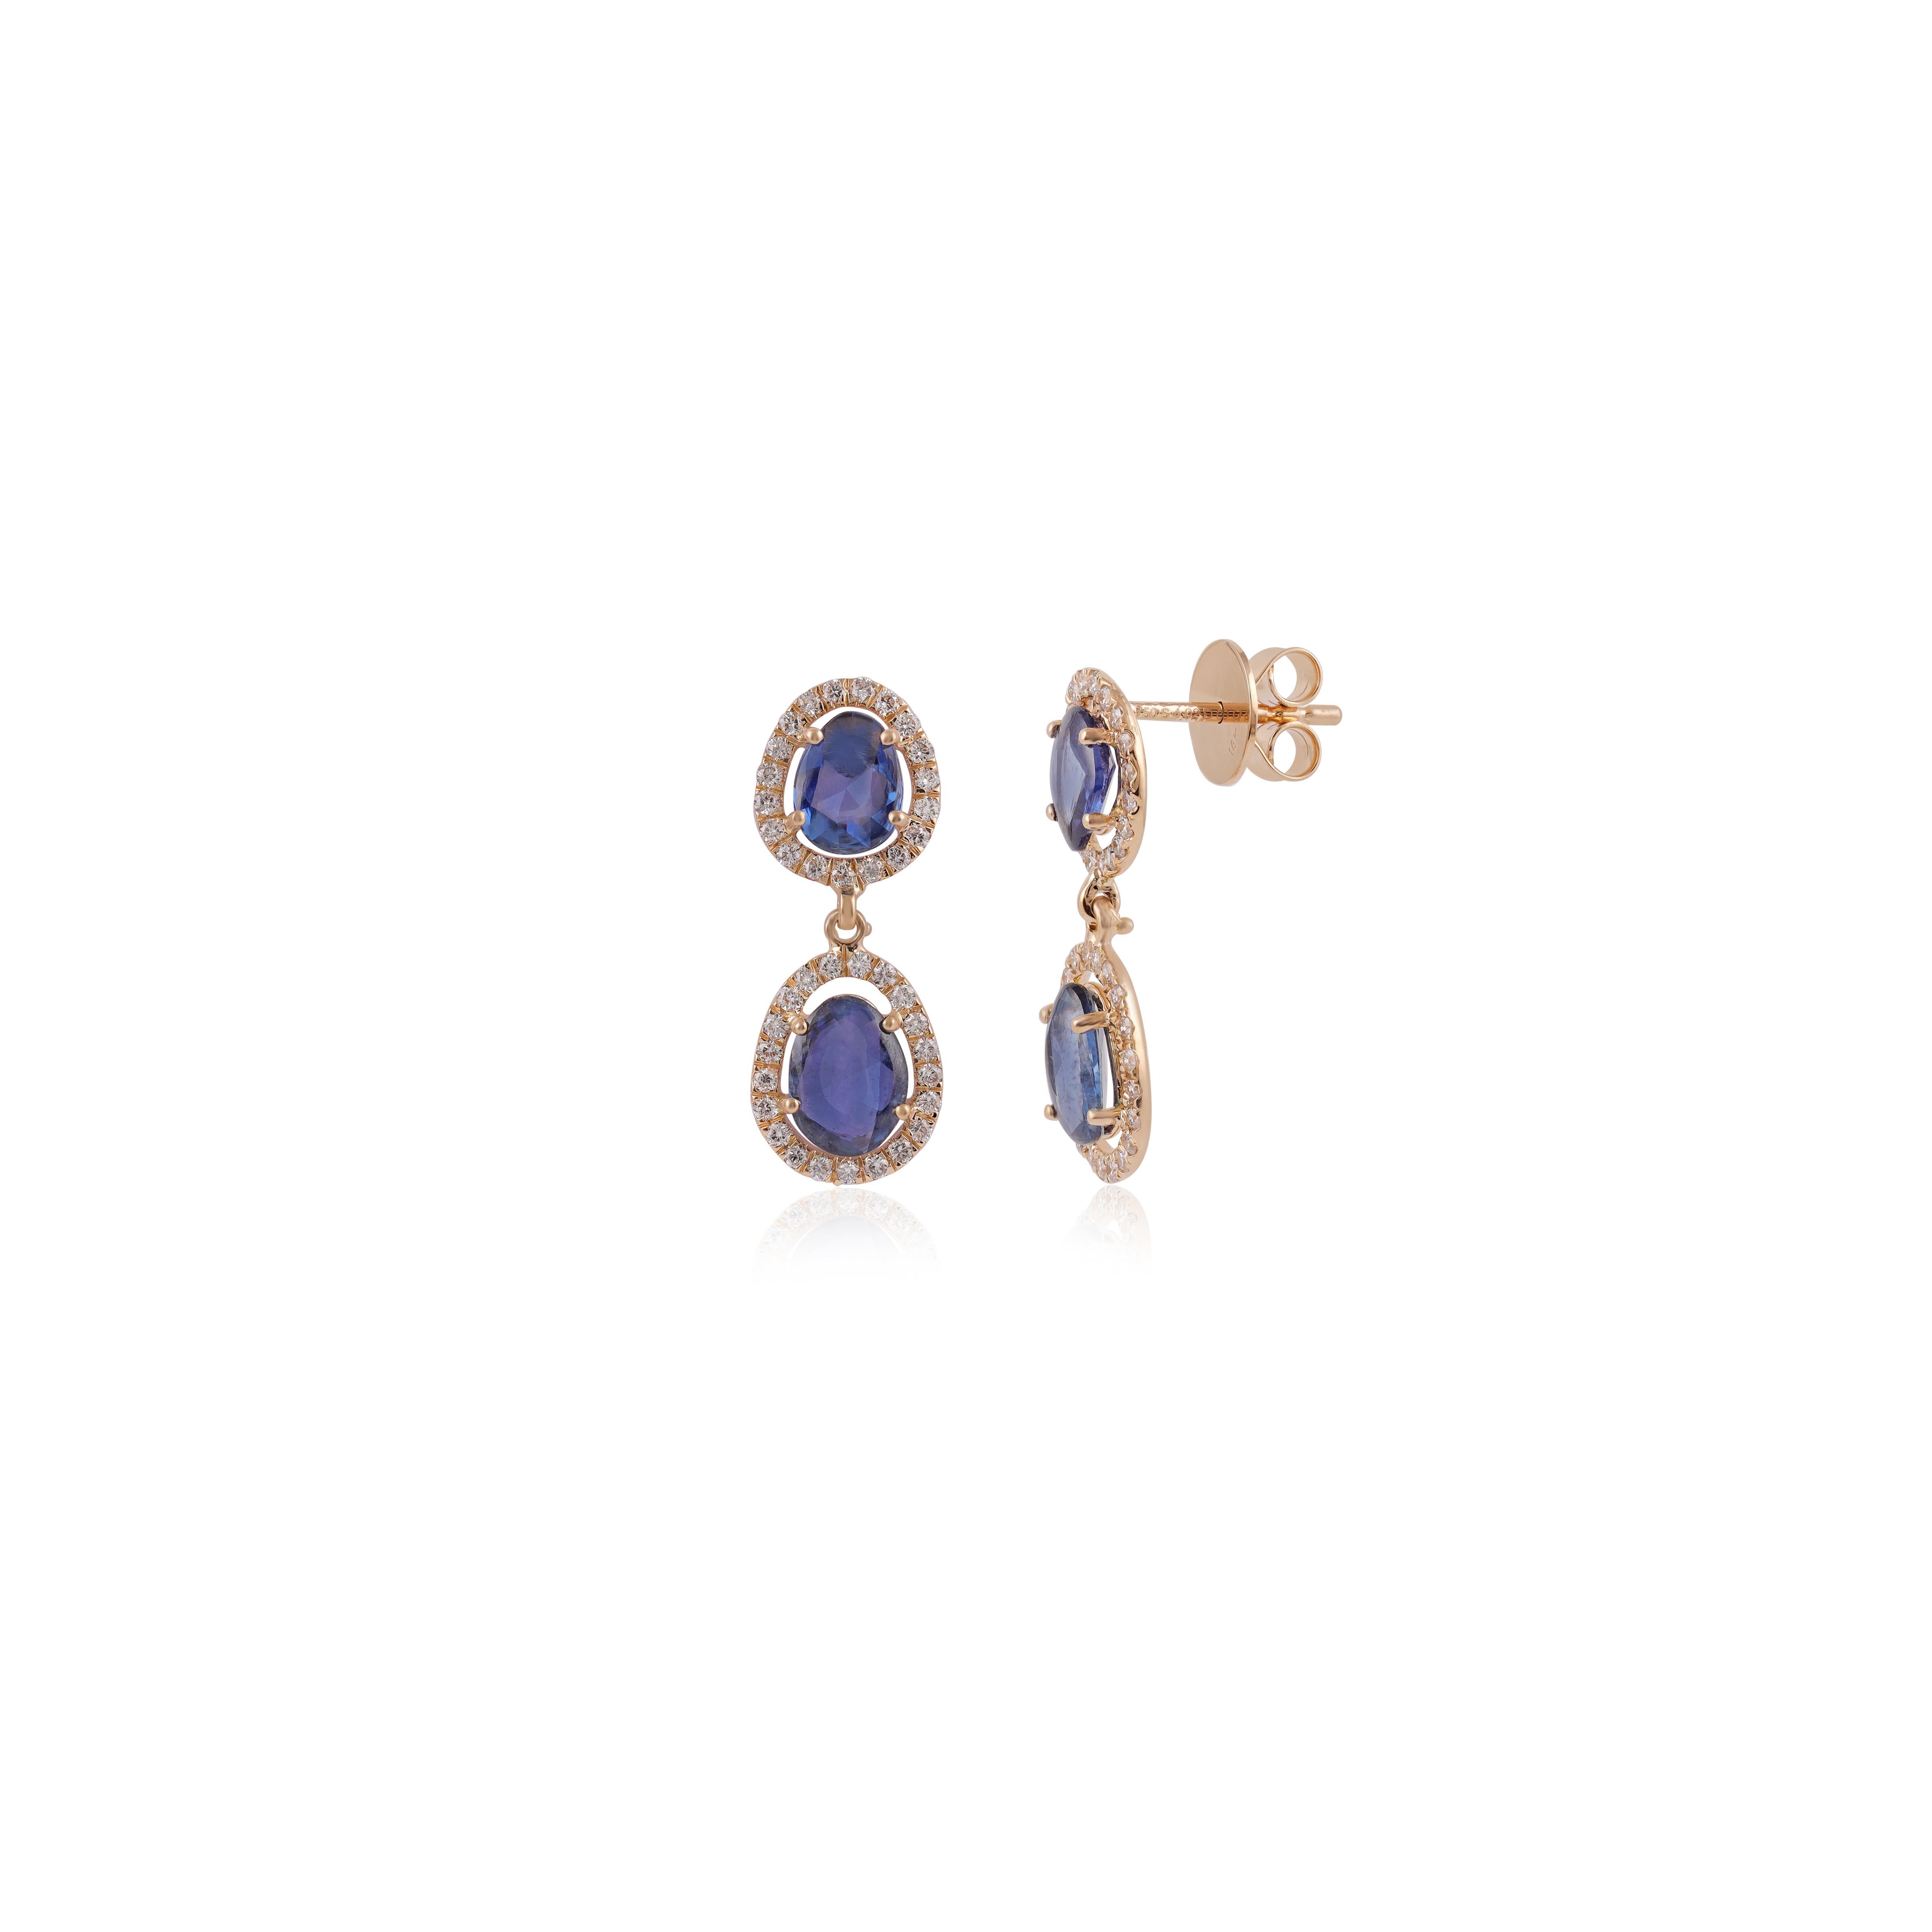 Rose Cut 4.03 Carat Blue Sapphire and Diamond Earring Studded in 18 Karat Yellow Gold For Sale